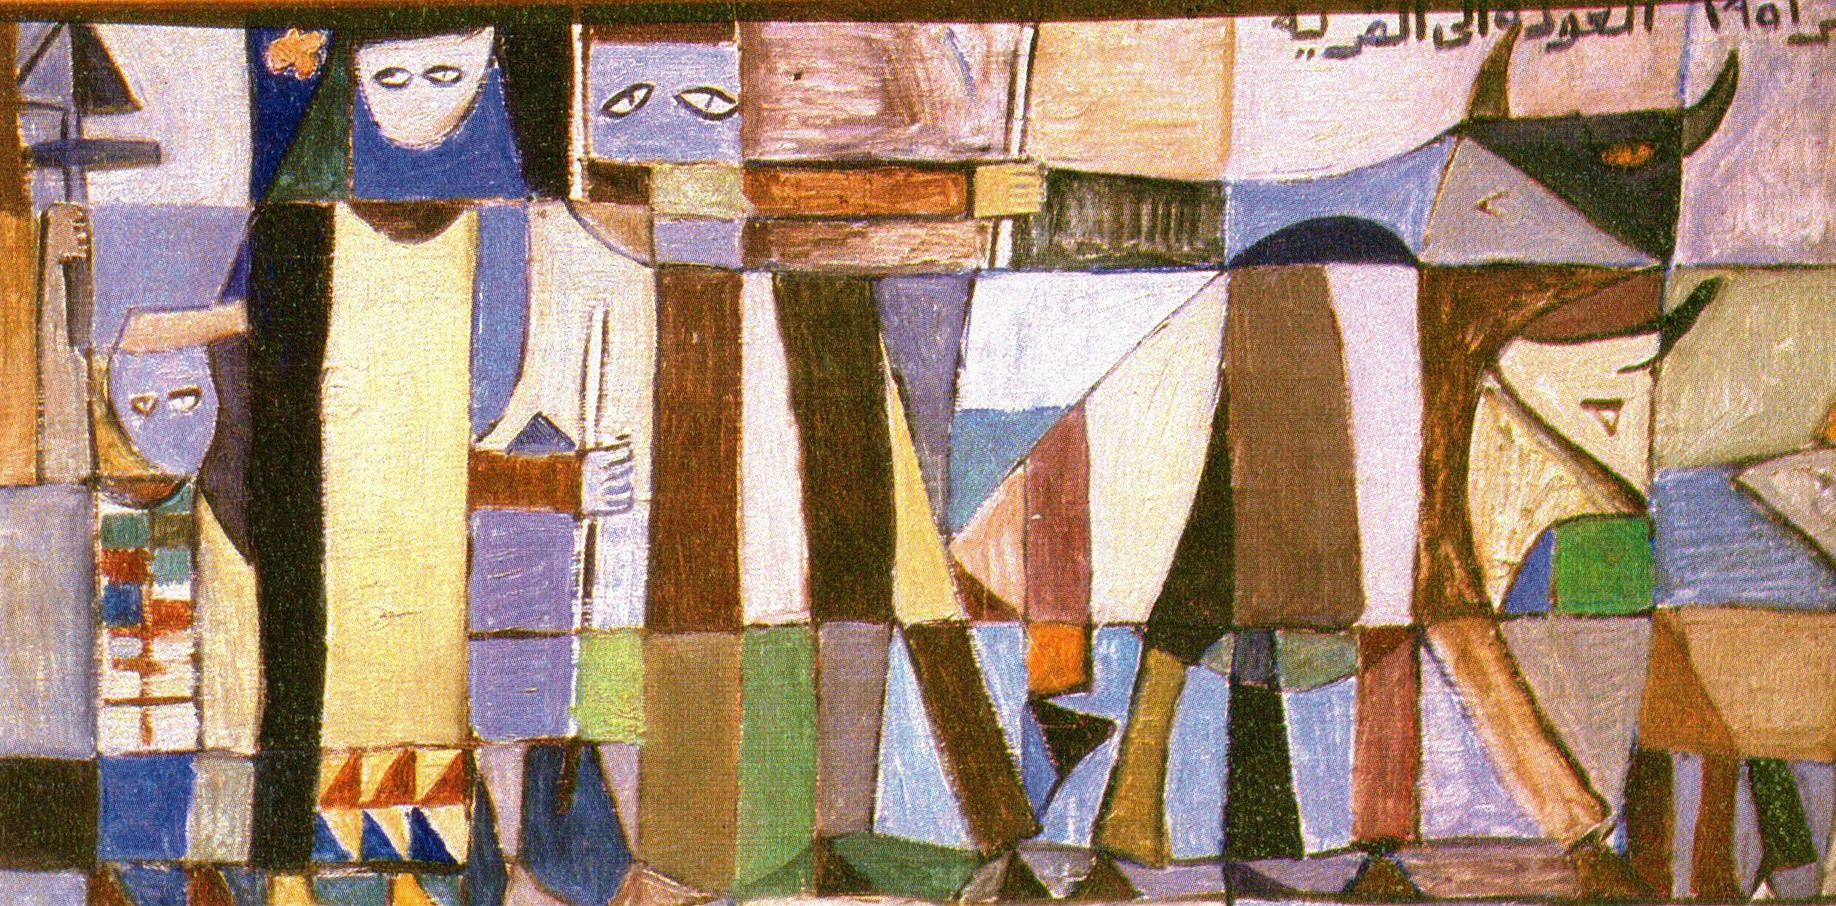 Shakir Hassan Al Said, Return to the Village, oil on canvas, 1951. Looted from the Baghdad Museum of Modern Art. Reproduced with Permission from the Artist’s Family. Photograph courtesy of Darat al Funun